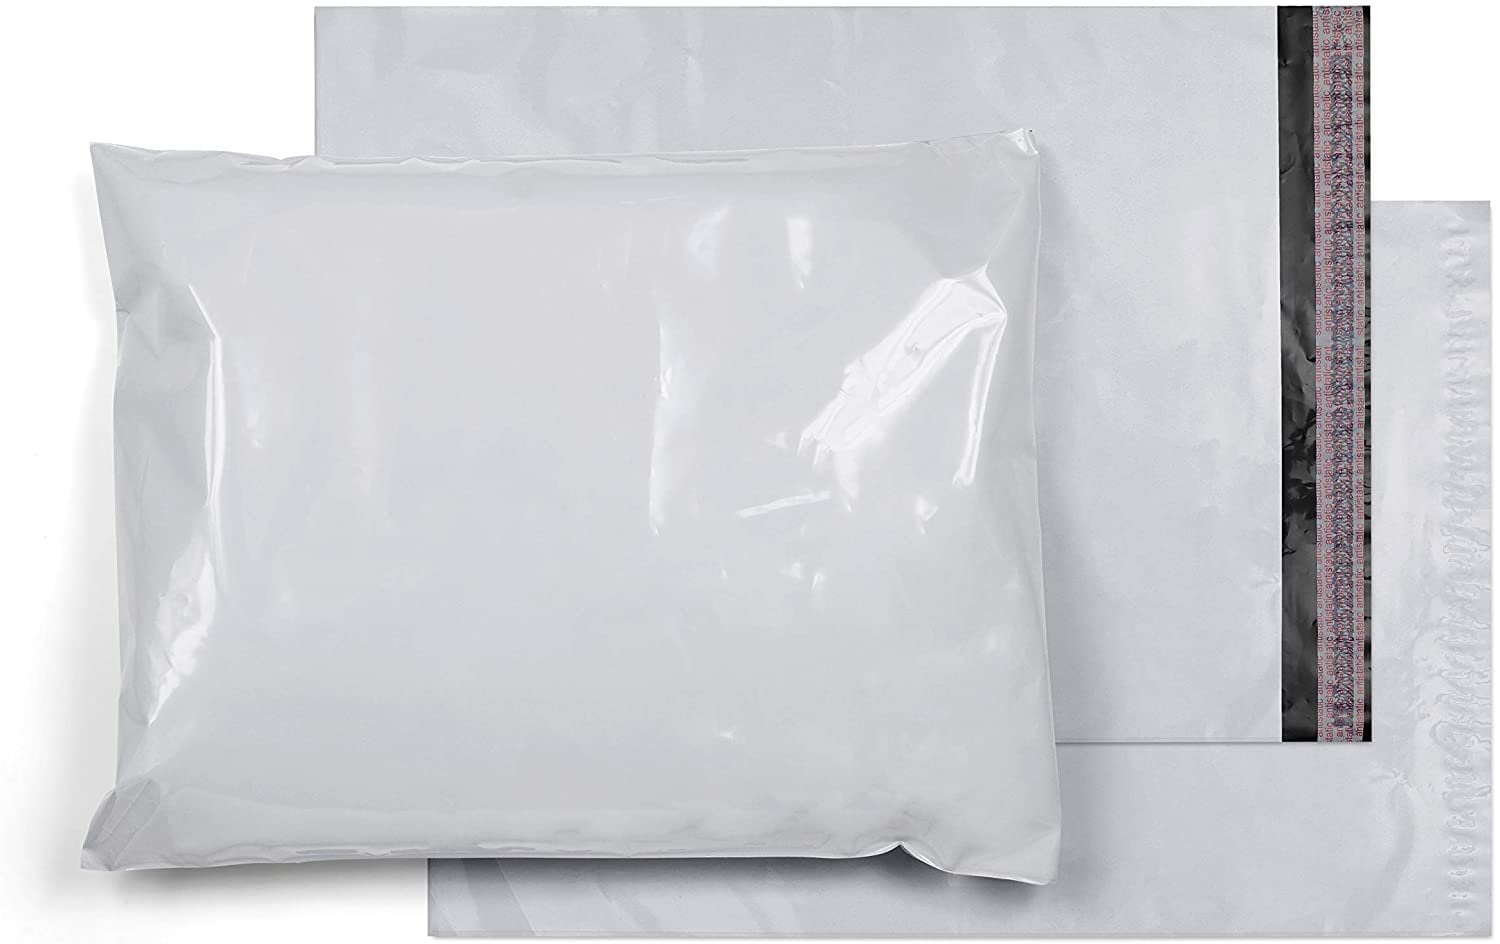 5000 7.5X10.5 Poly Mailers Plastic Envelopes Shipping Mailing Bags 2.5 MIL White 